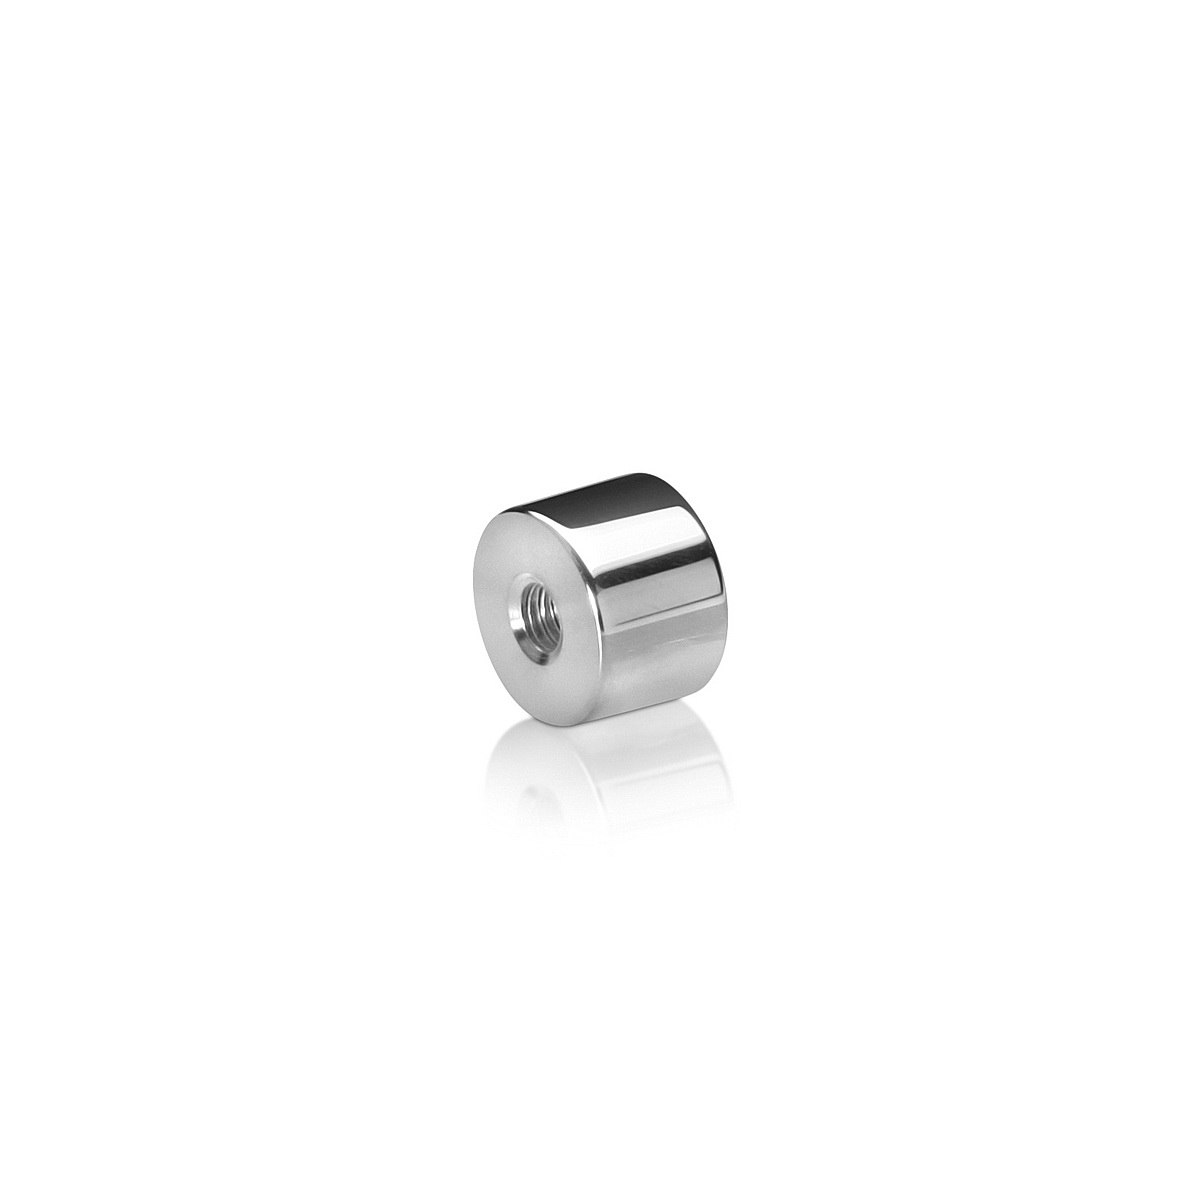 1/4-20 Threaded Barrels Diameter: 3/4'', Length: 1/2'', Polished Finish Grade 304 [Required Material Hole Size: 17/64'' ]